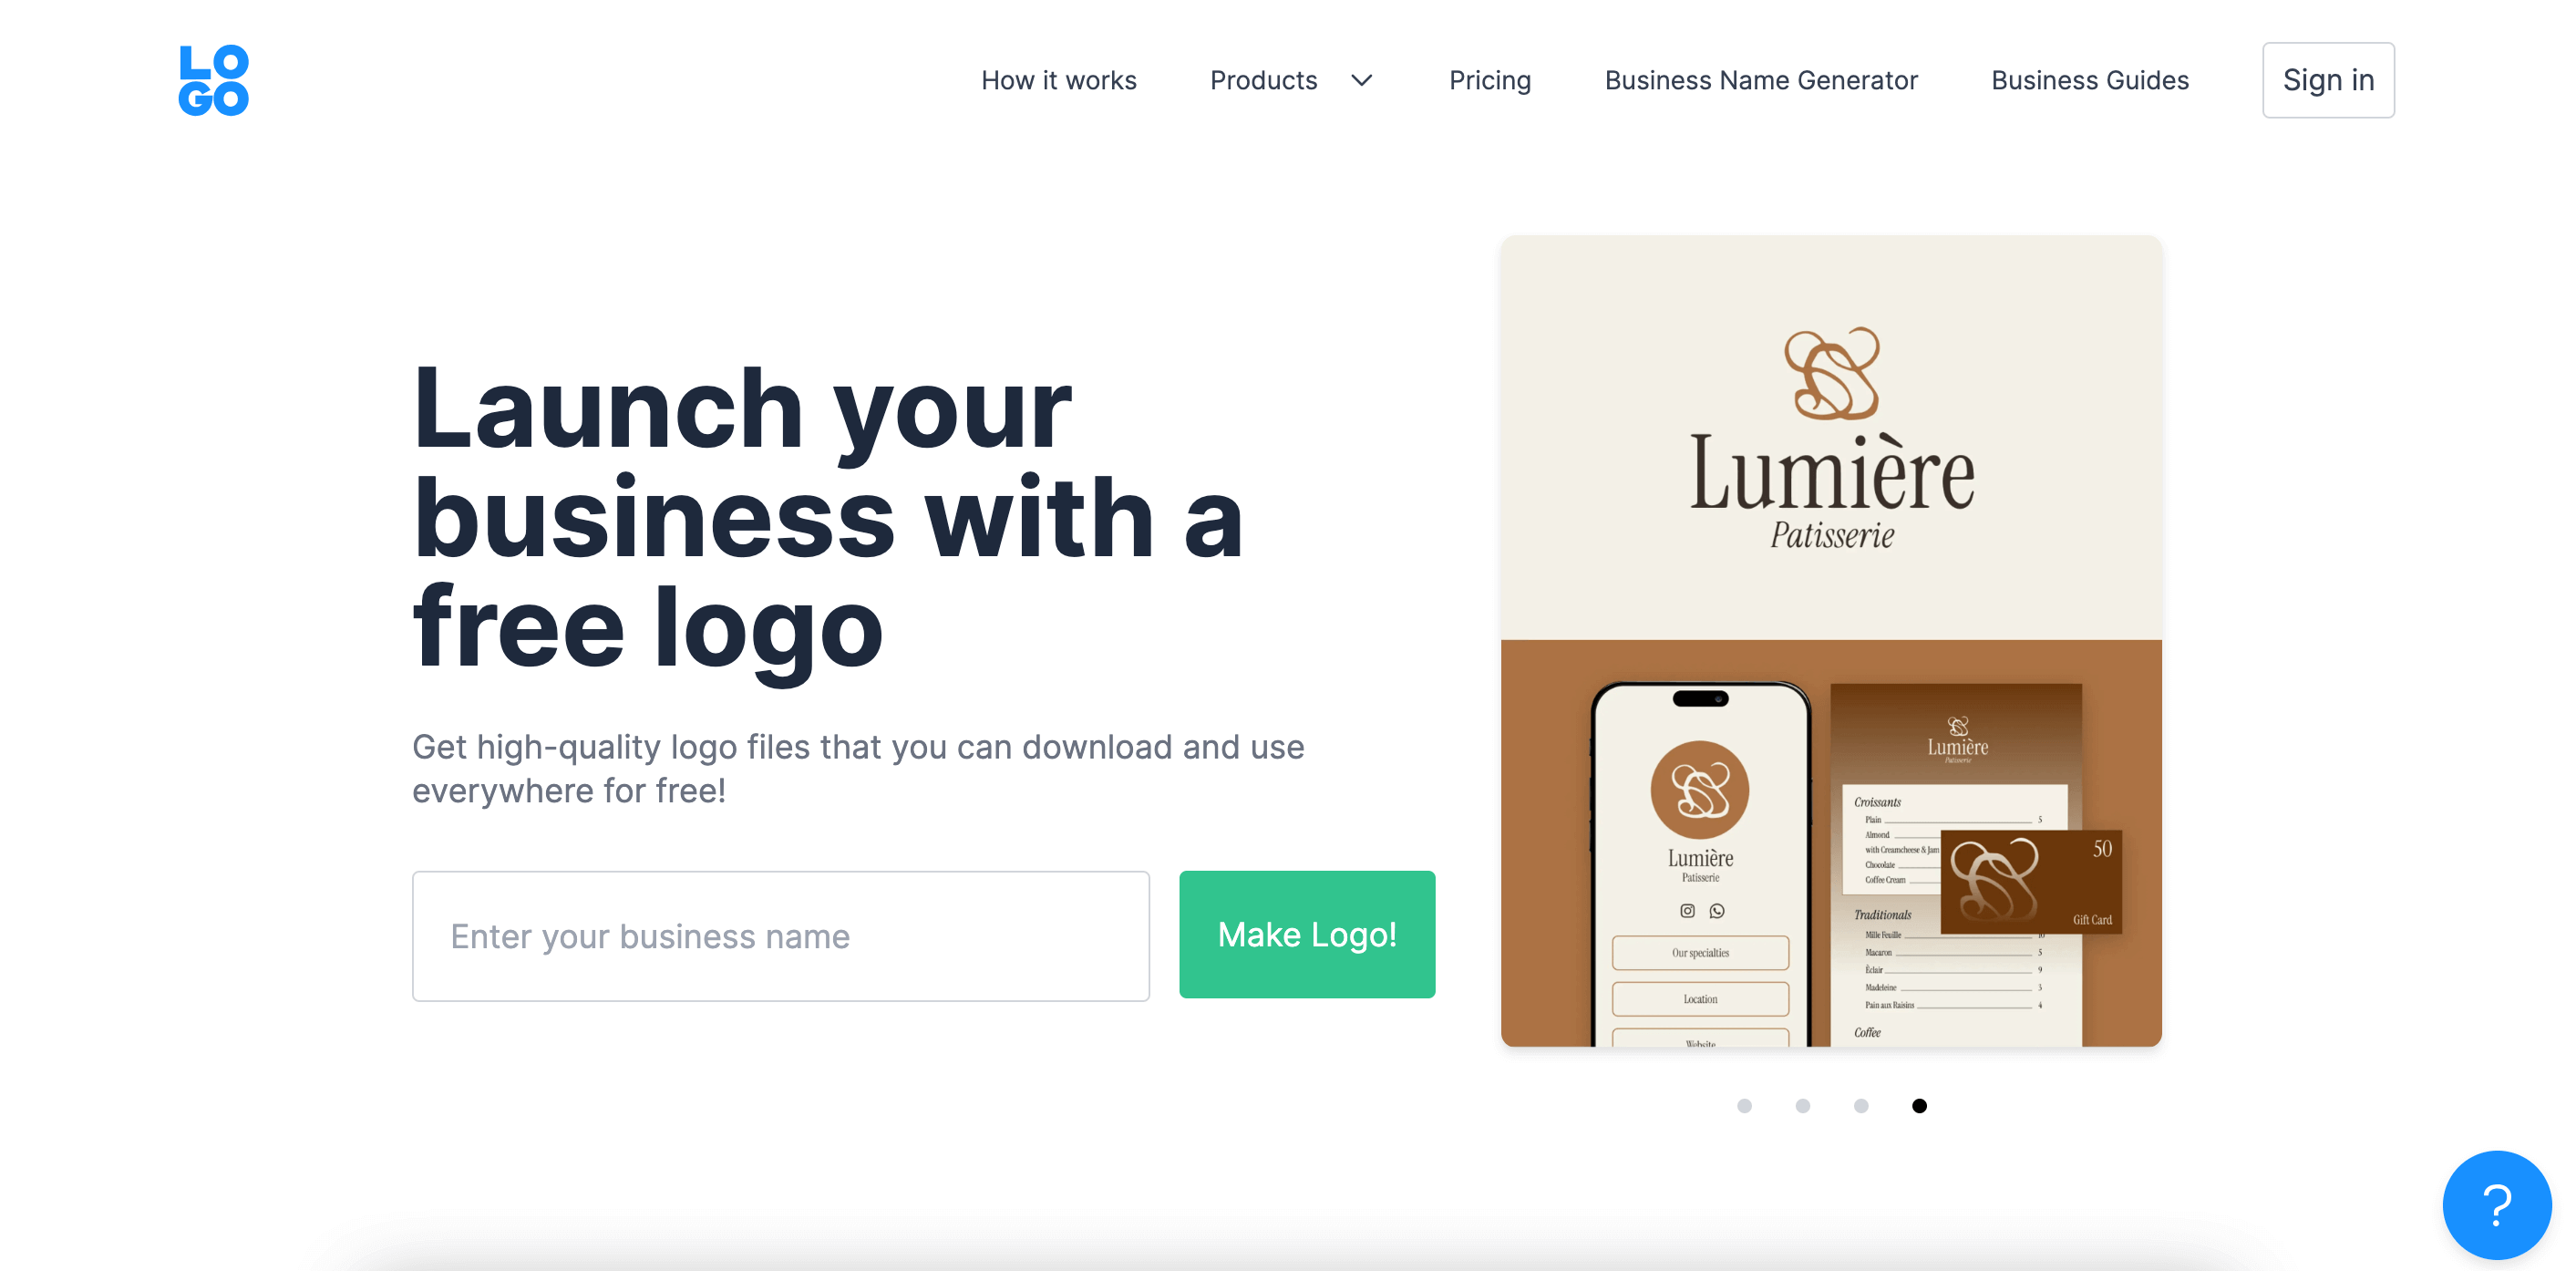 Top Logo Makers And Logo Design Apps